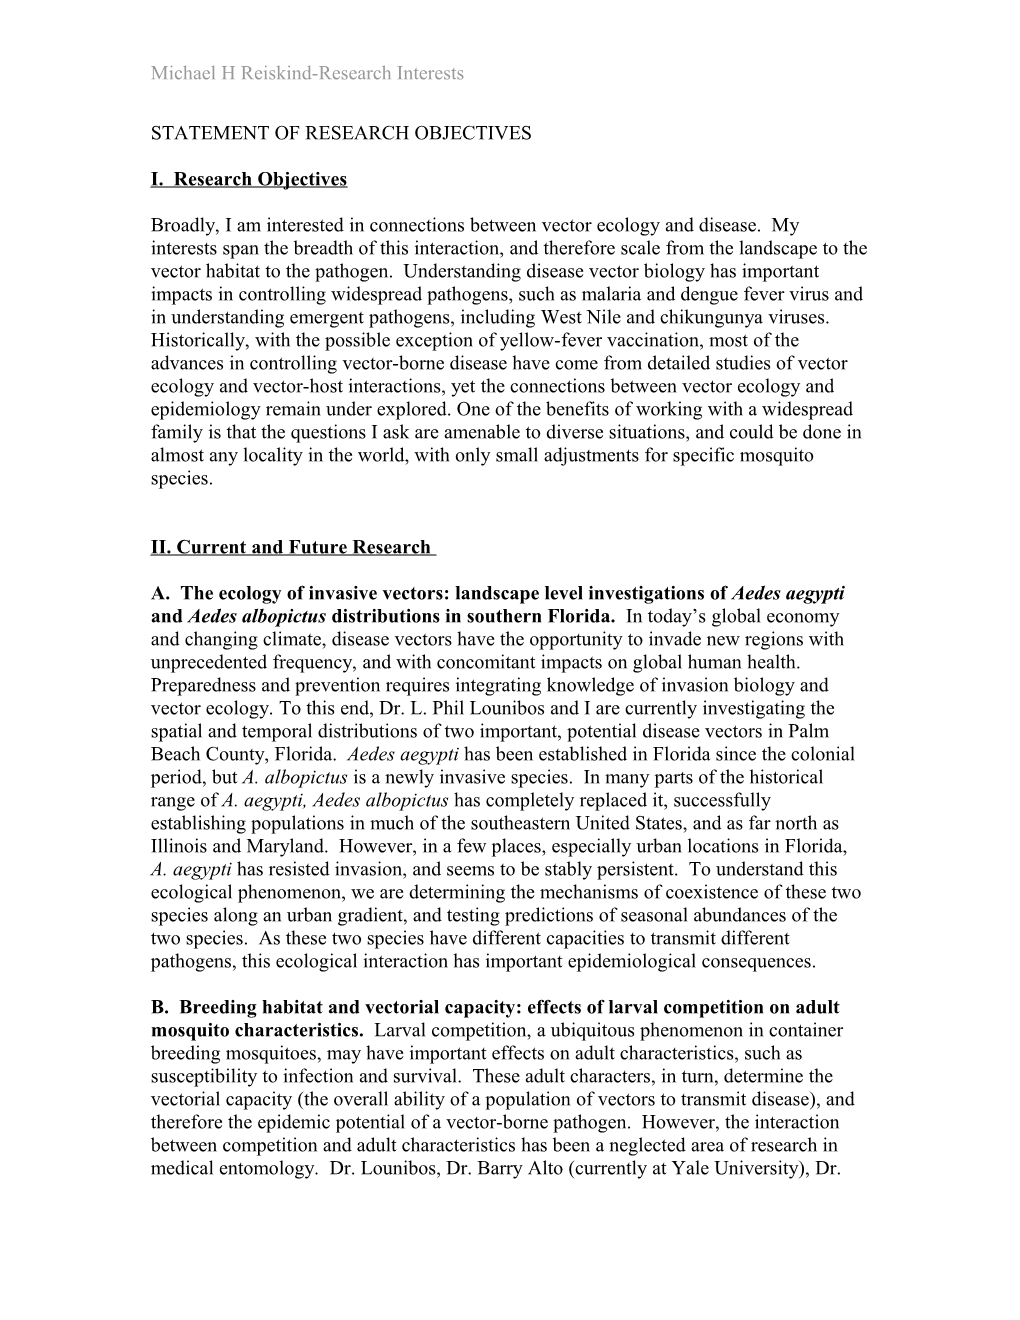 Statement of Research Objectives